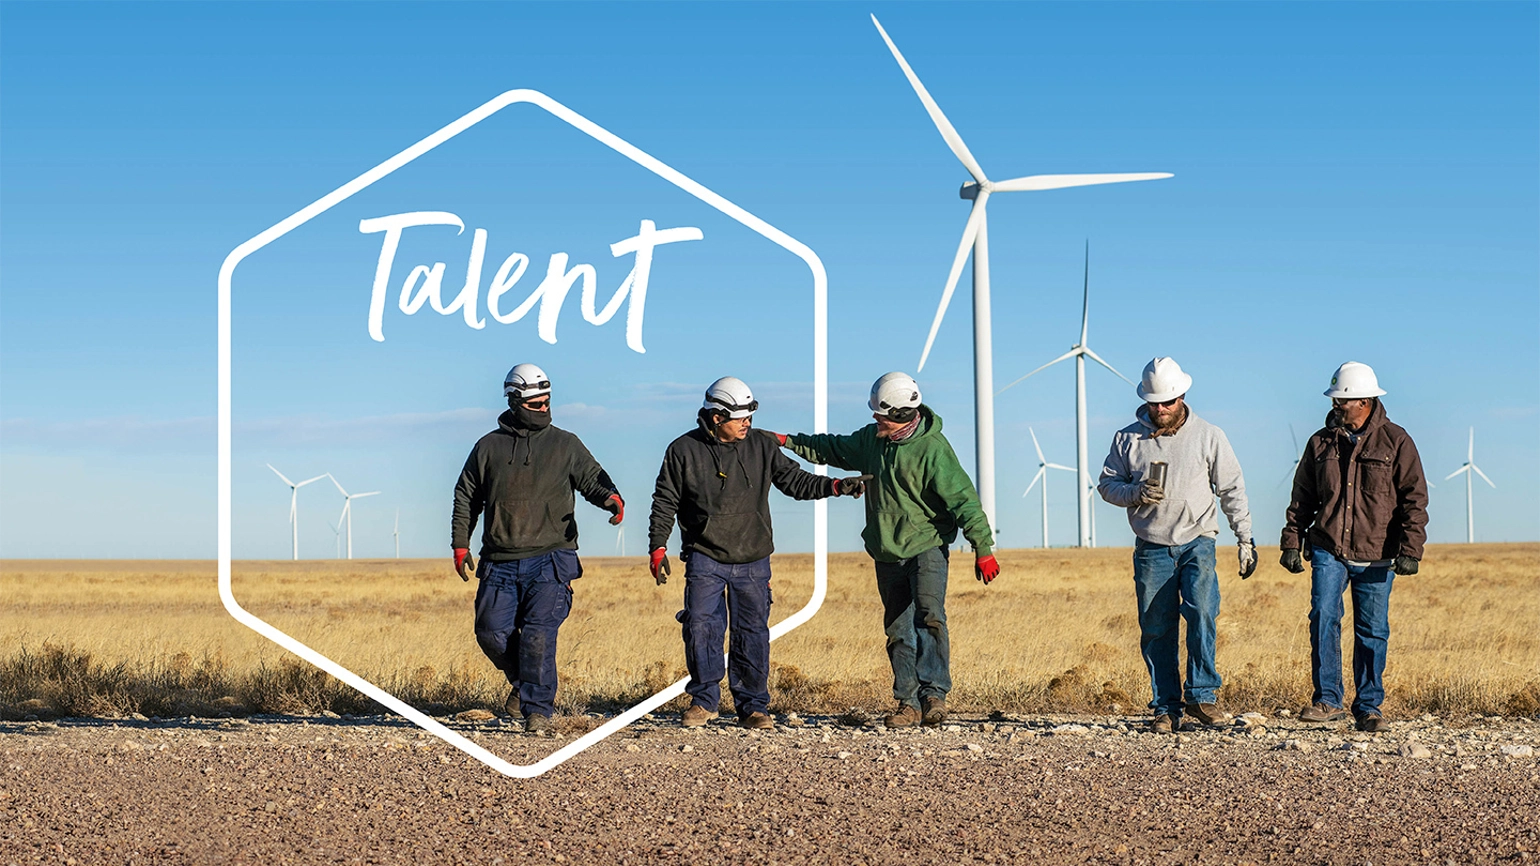 Example of an image from the report design with a group of bp workers walking together in a wind farm field and an illustration with the title talent behind them